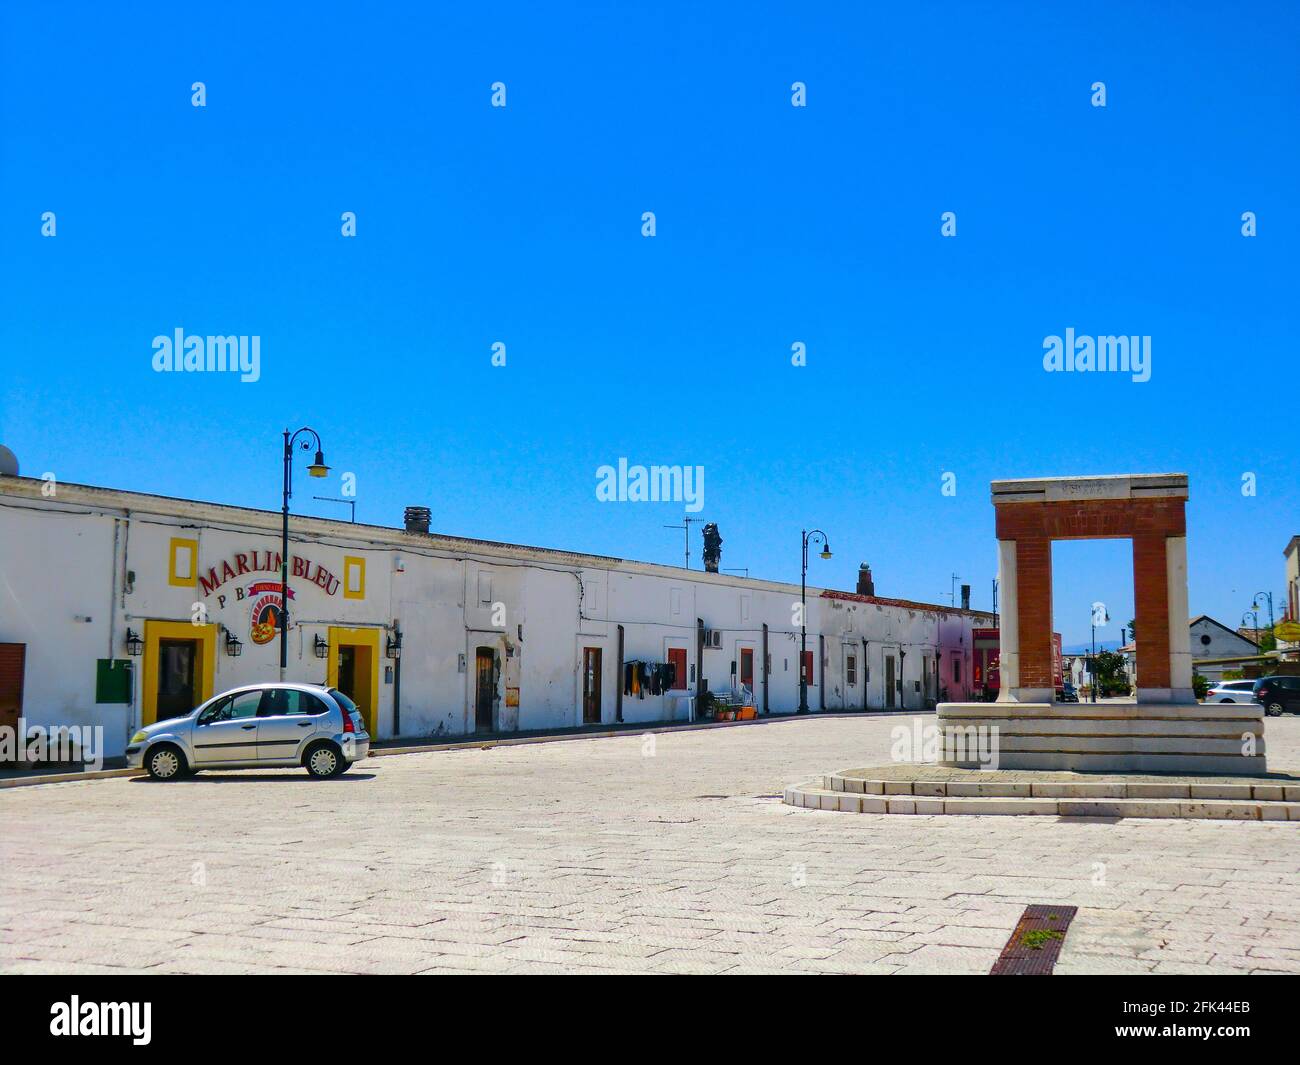 Page 2 - Jonico High Resolution Stock Photography and Images - Alamy